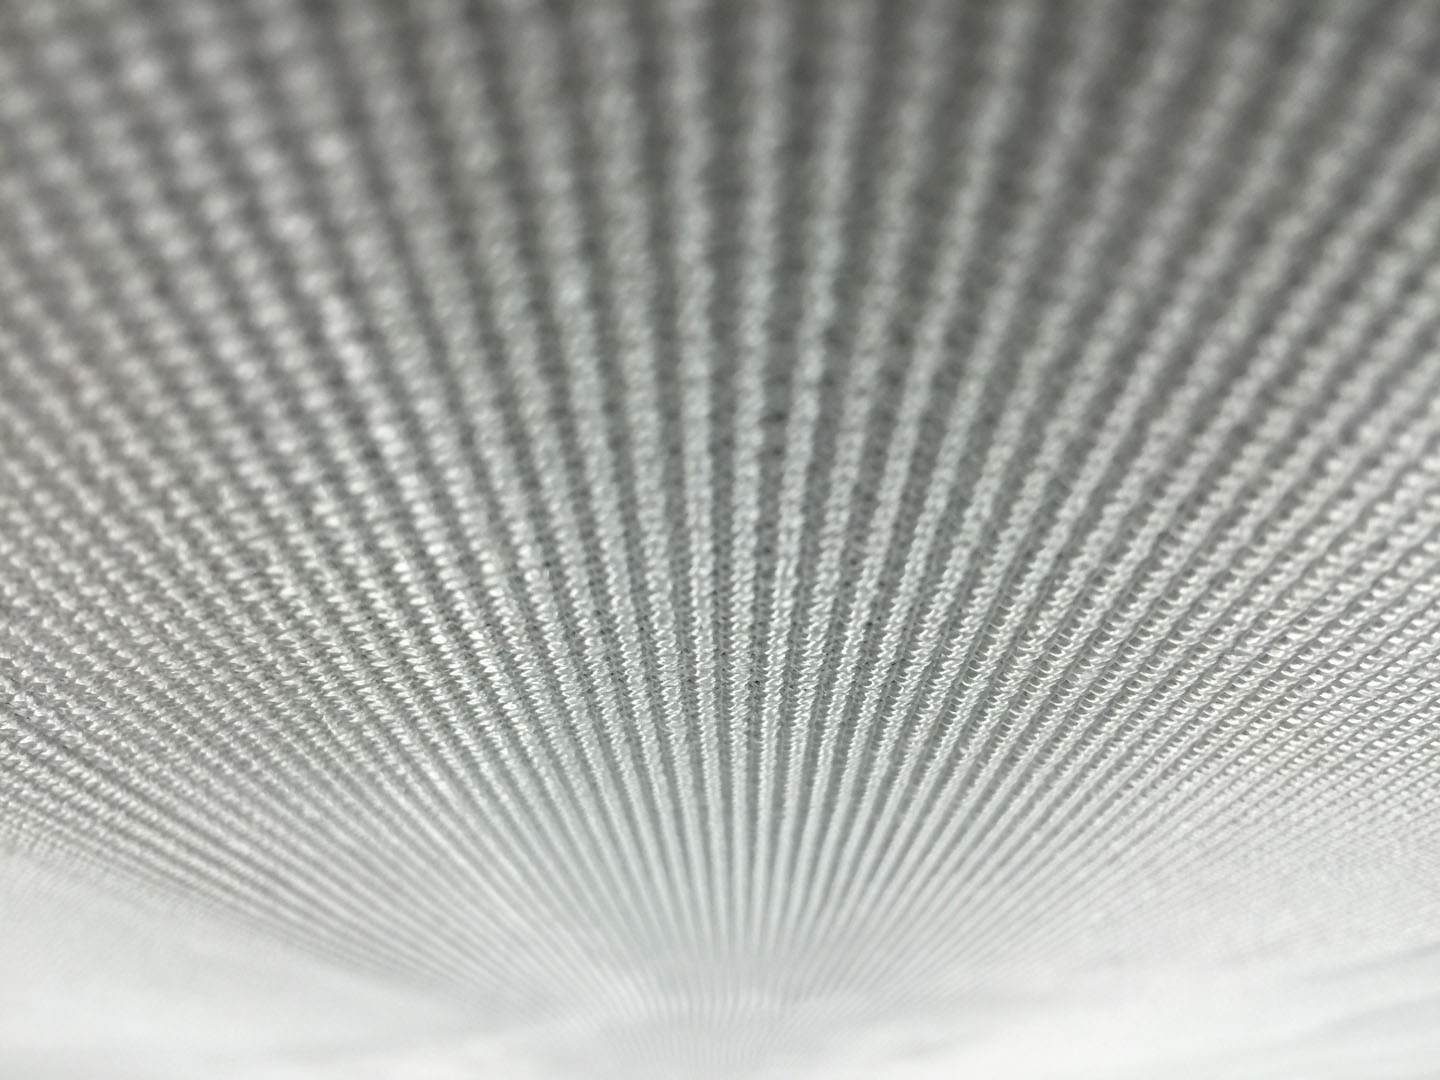 A white ceiling with many lines of light